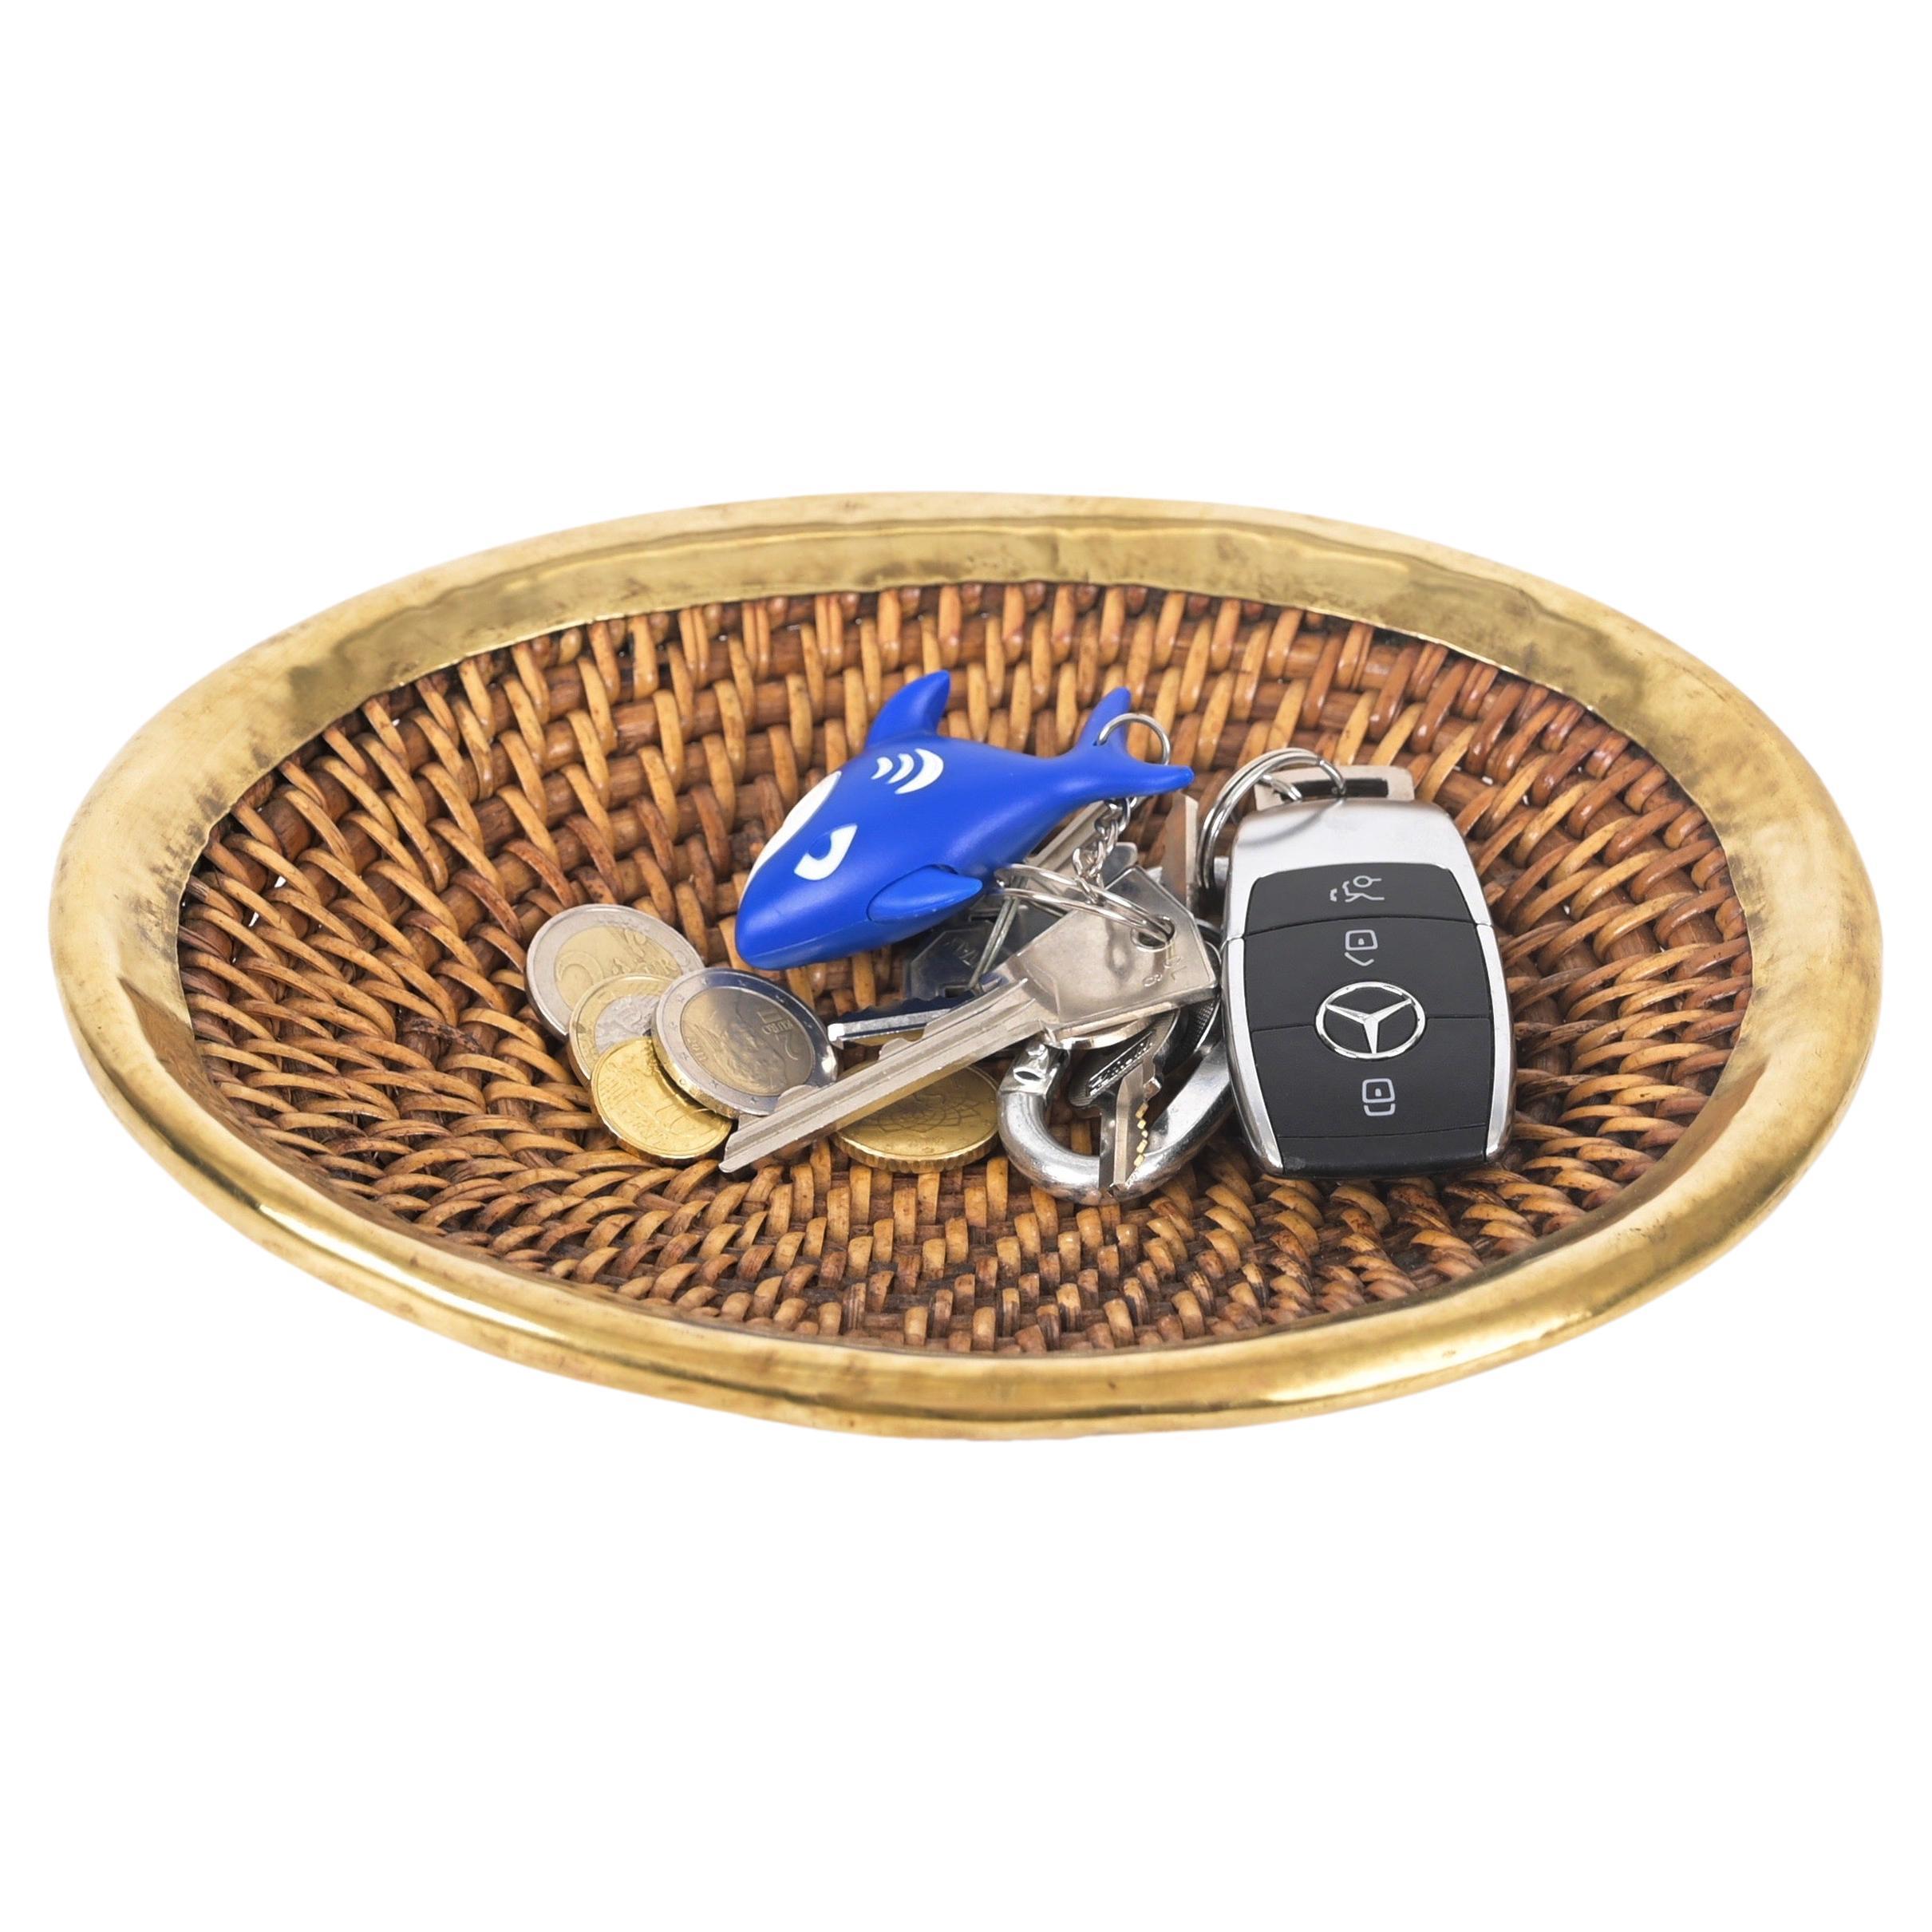 French Riviera Vide-Poche Bowl Tray in Woven Rattan and Brass, Italy 1970s For Sale